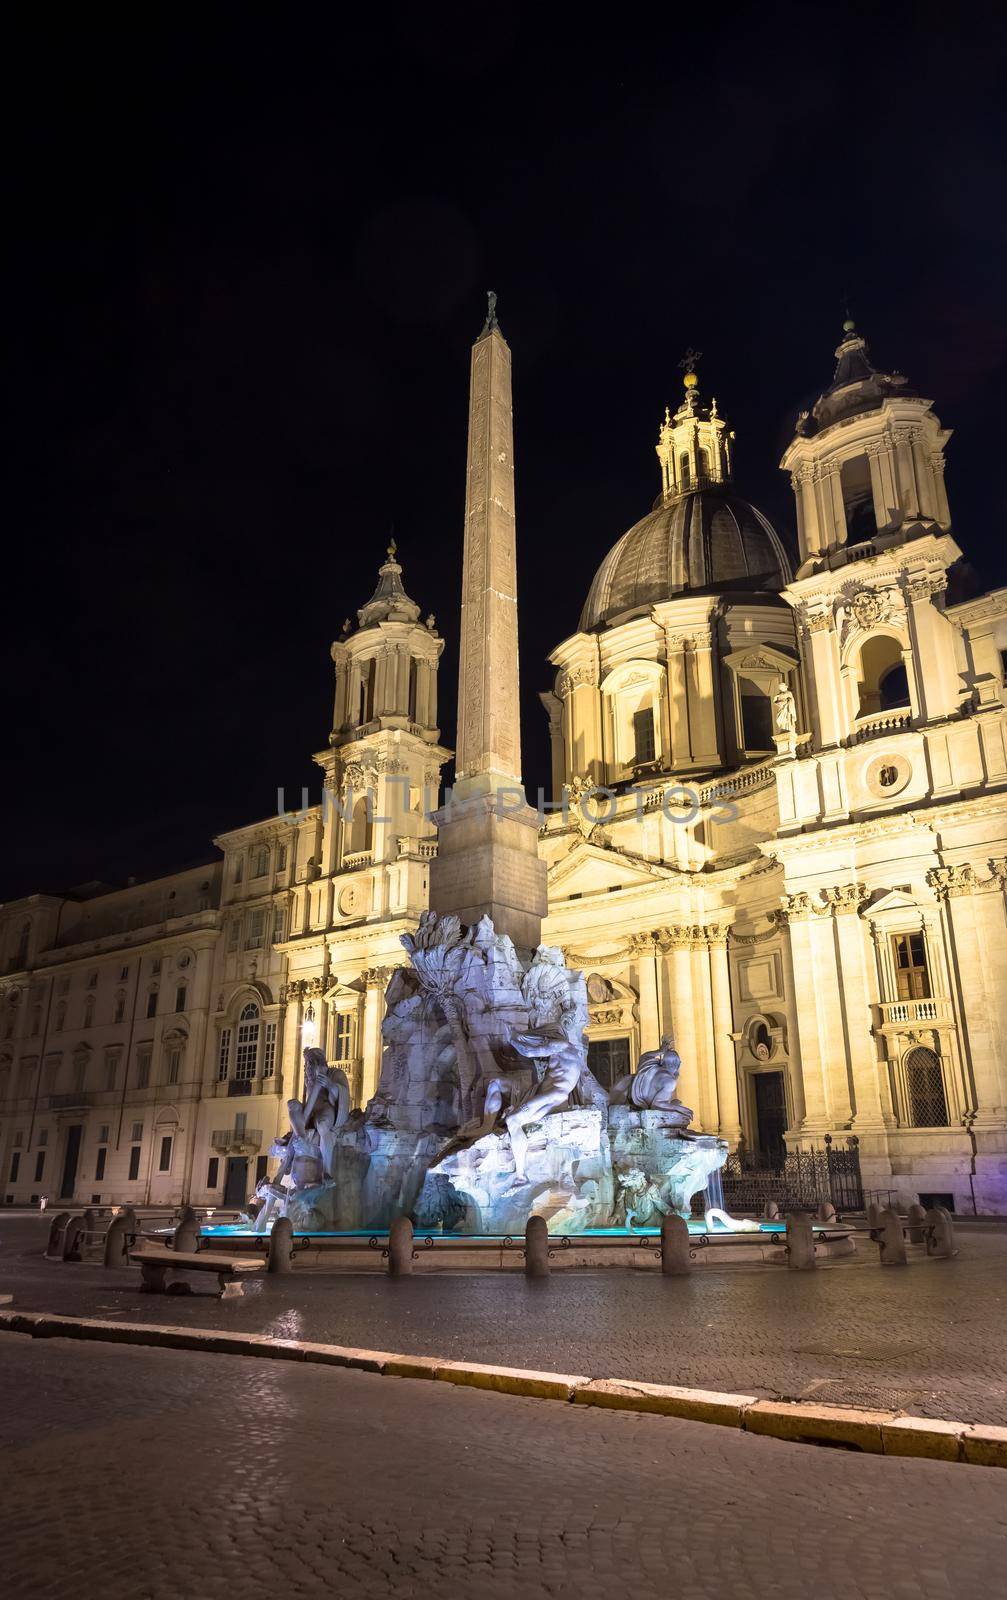 Piazza Navona (Navona's Square), in Rome, Italy, with the famous Bernini fountain by night. by Perseomedusa